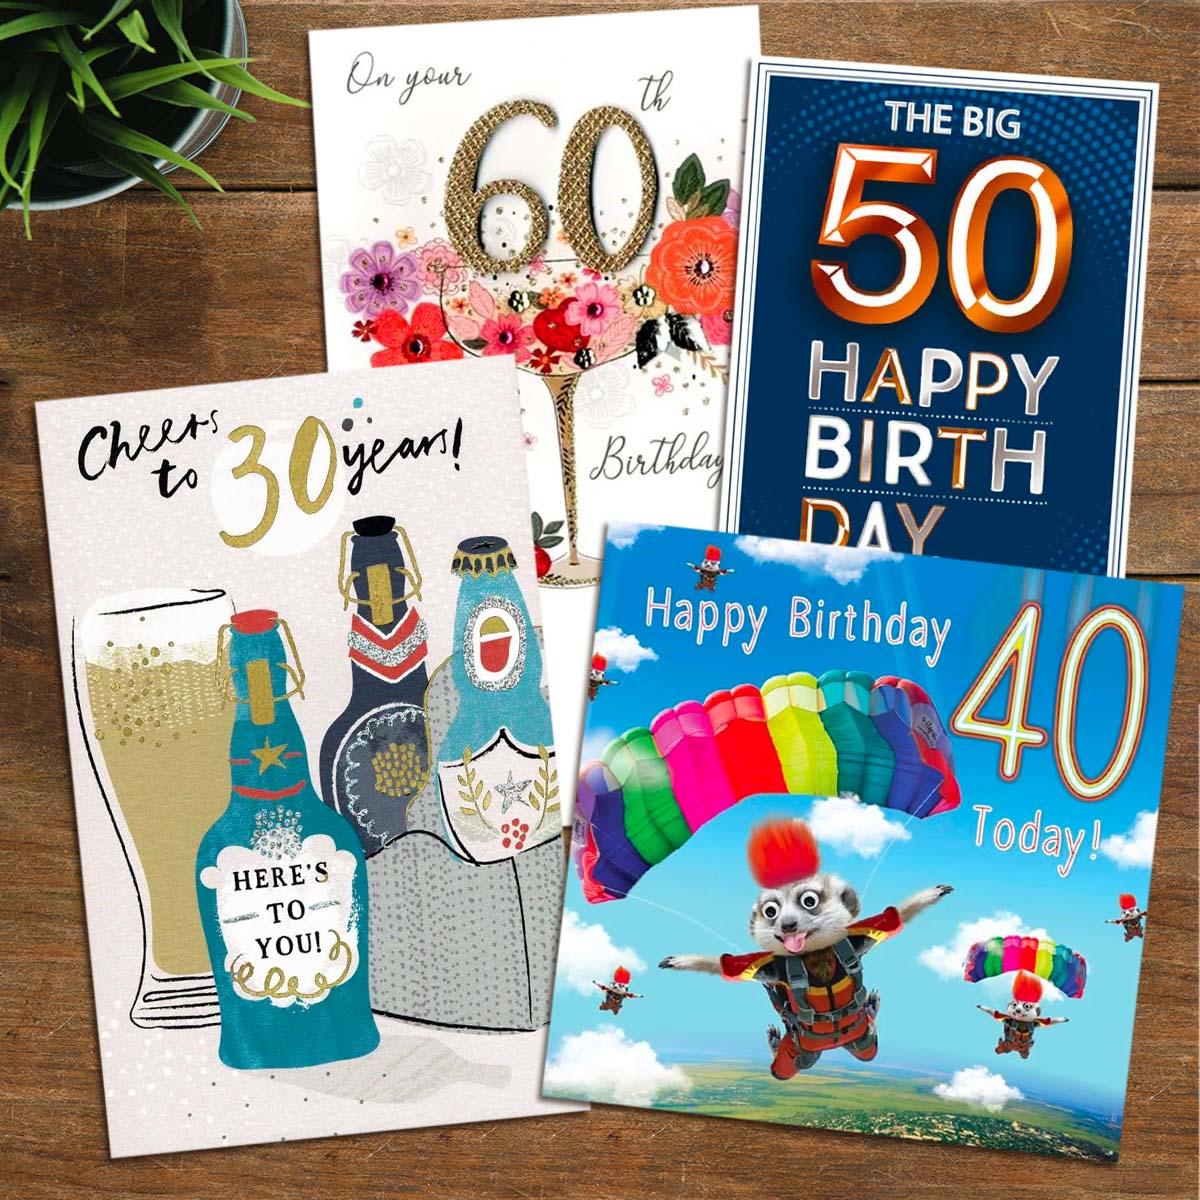 A Selection Of Cards To Show The Depth Of Range In Our Age 30-60 Age Cards Section